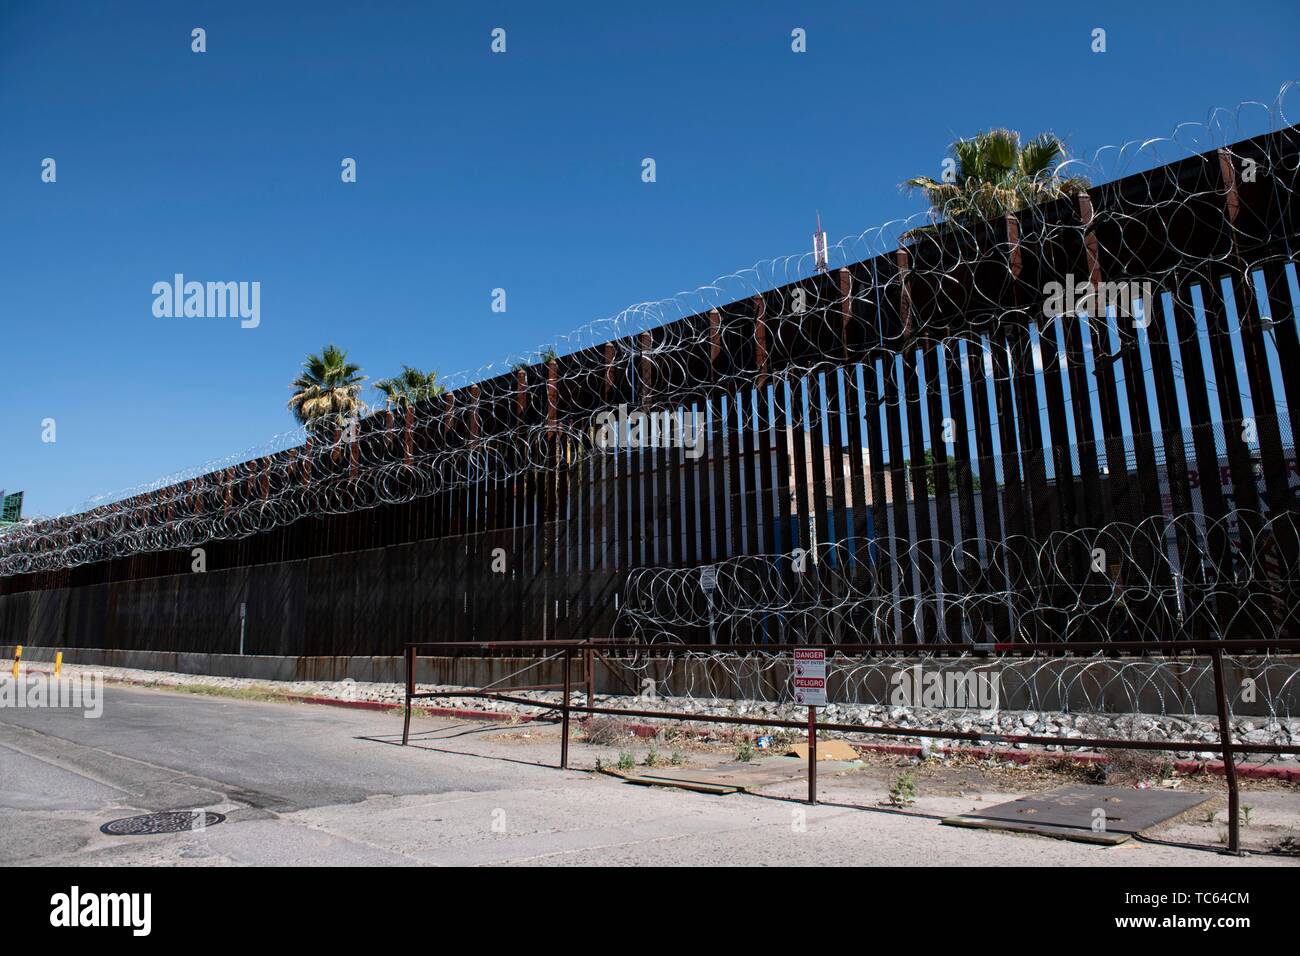 Razor wire covers the old metal border fence separating Mexico from the United States at the border crossing point May 29, 2019 at Nogales, Arizona. Stock Photo